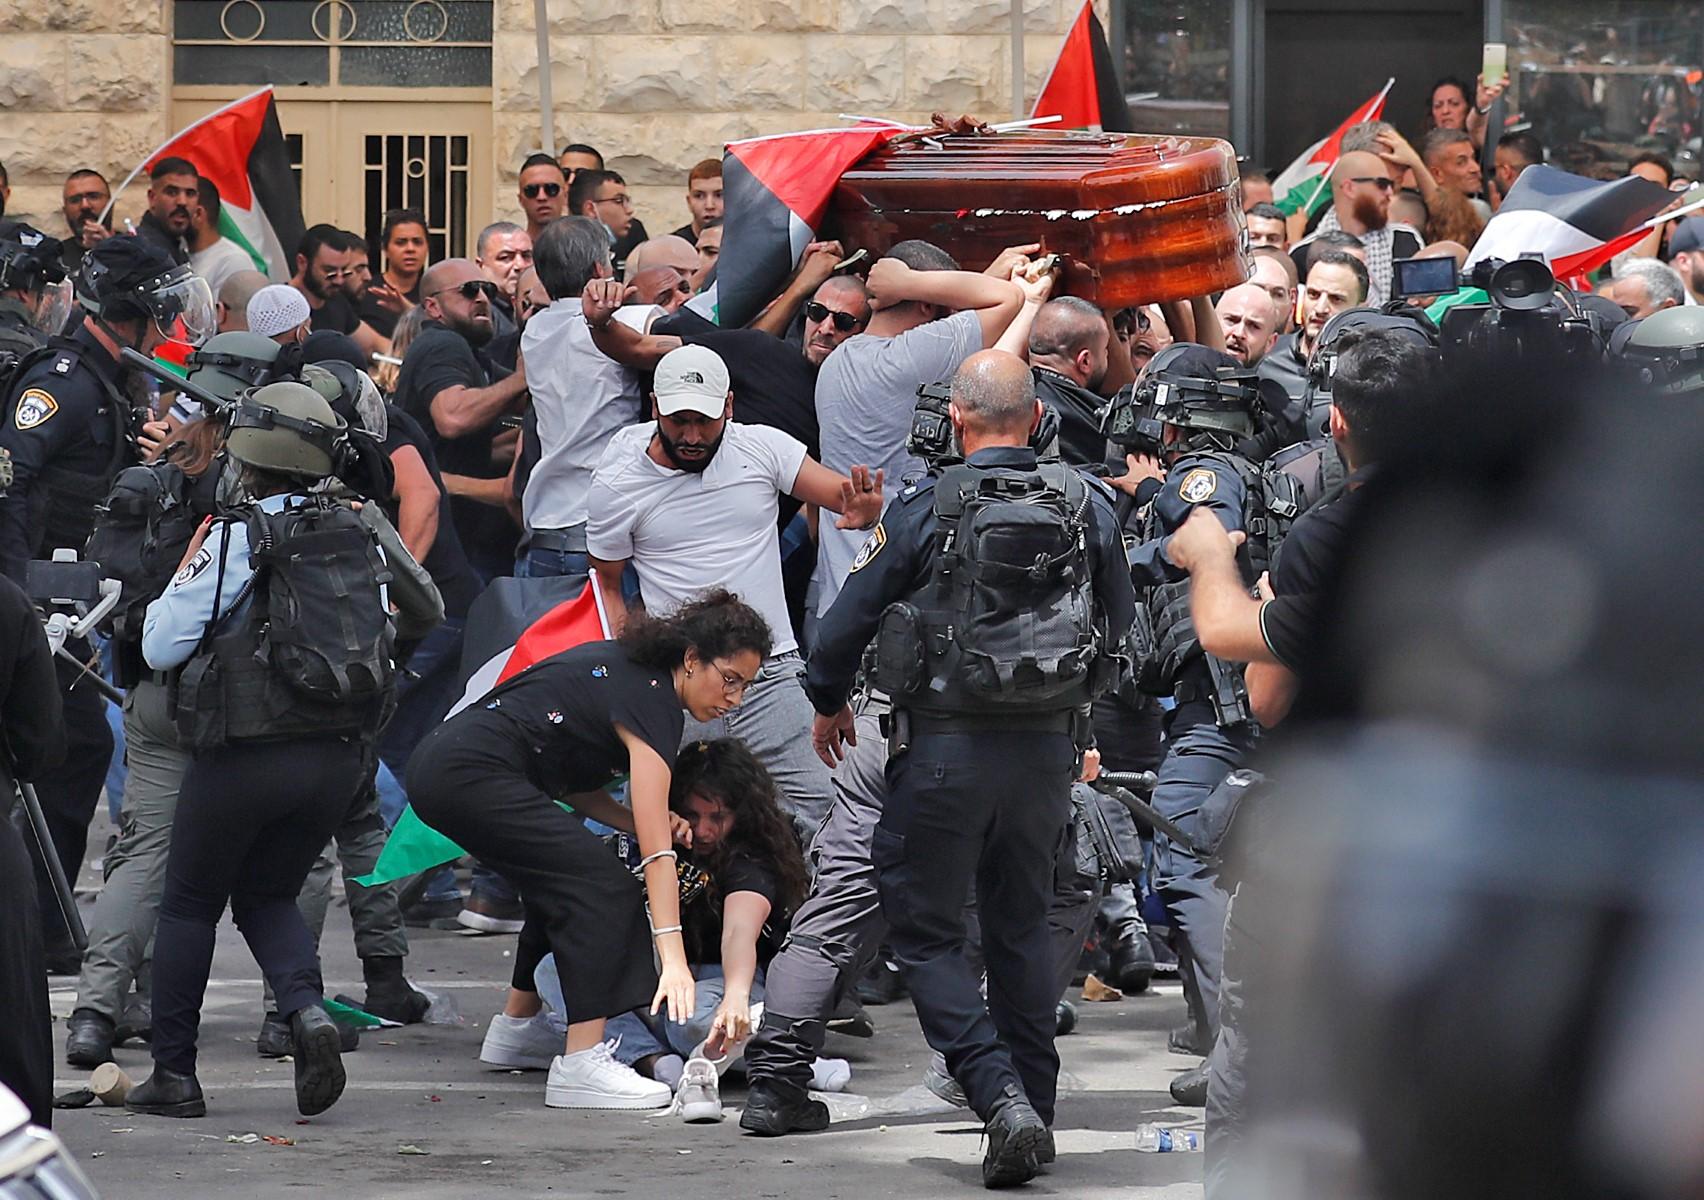 Violence erupts between Israeli security forces and Palestinian mourners carrying the casket of slain Al Jazeera journalist Shireen Abu Akleh out of a hospital, before being transported to a church and then her resting place, in Jerusalem, on May 13. Photo: AFP